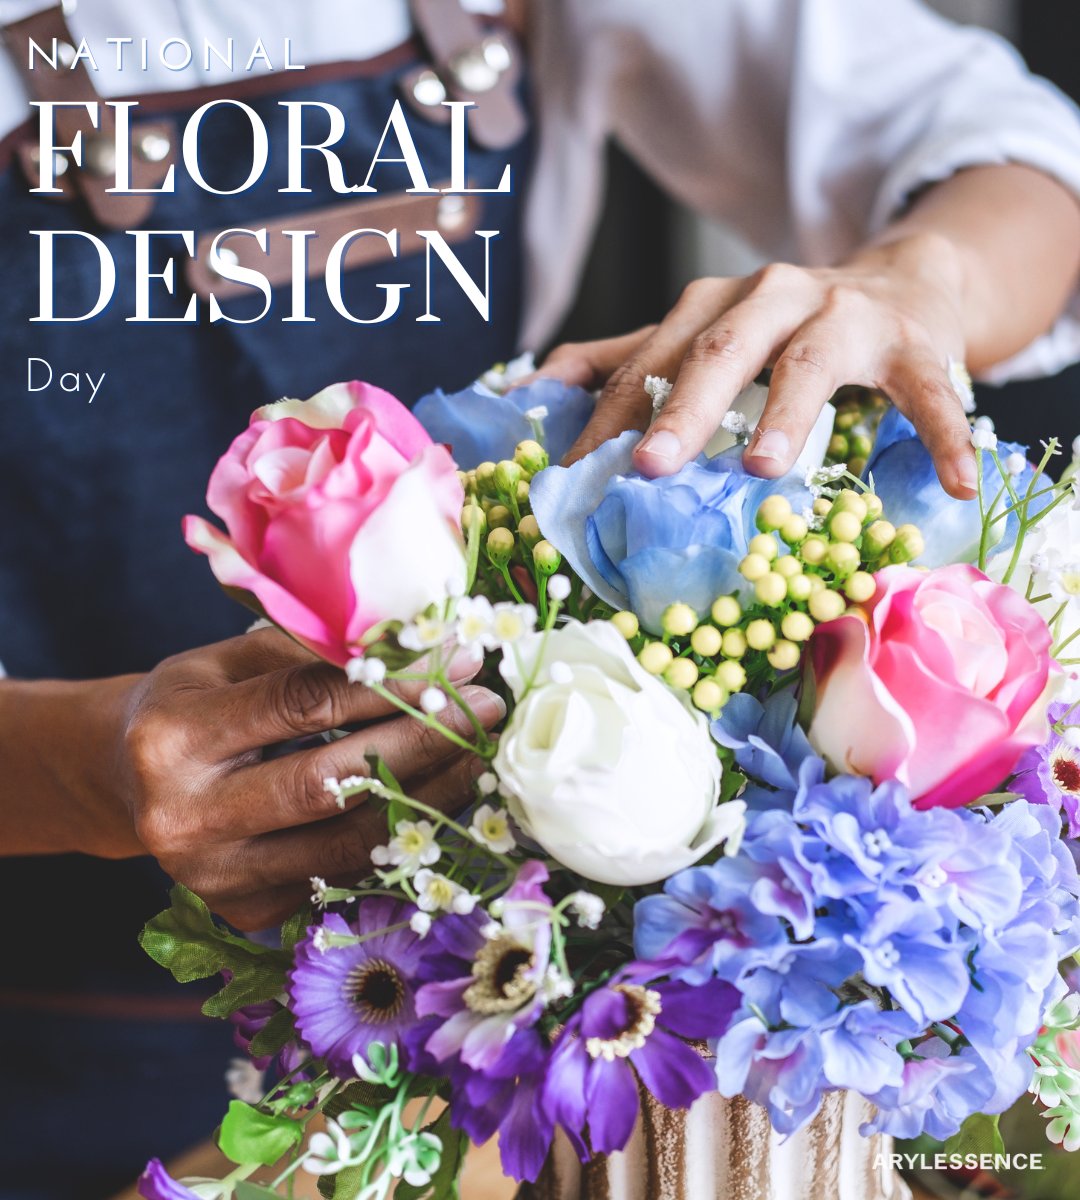 Arylessence on X: Today we celebrate the stunning art of floral